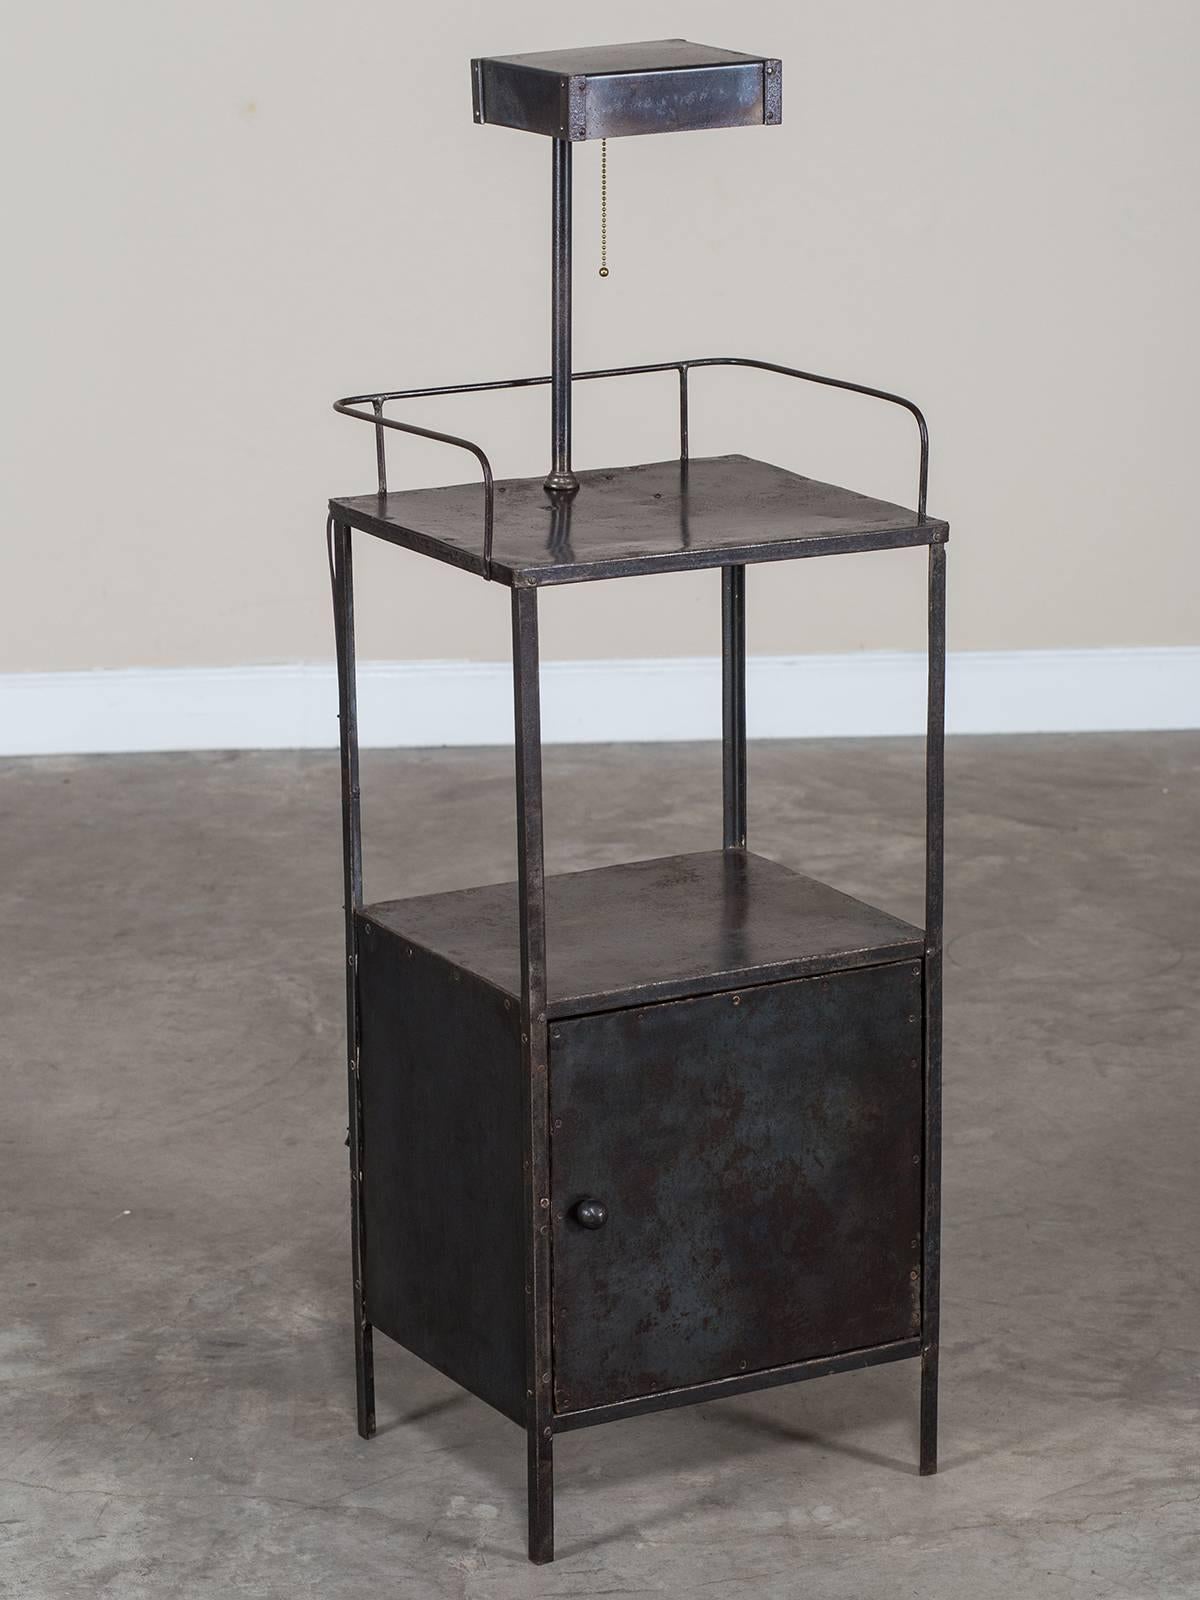 Receive our new selections direct from 1stdibs by email each week. Please click Follow Dealer below and see them first!

This portable French metal cabinet circa 1940 is a vintage Industrial piece. The cabinet has a closed cabinet door and an